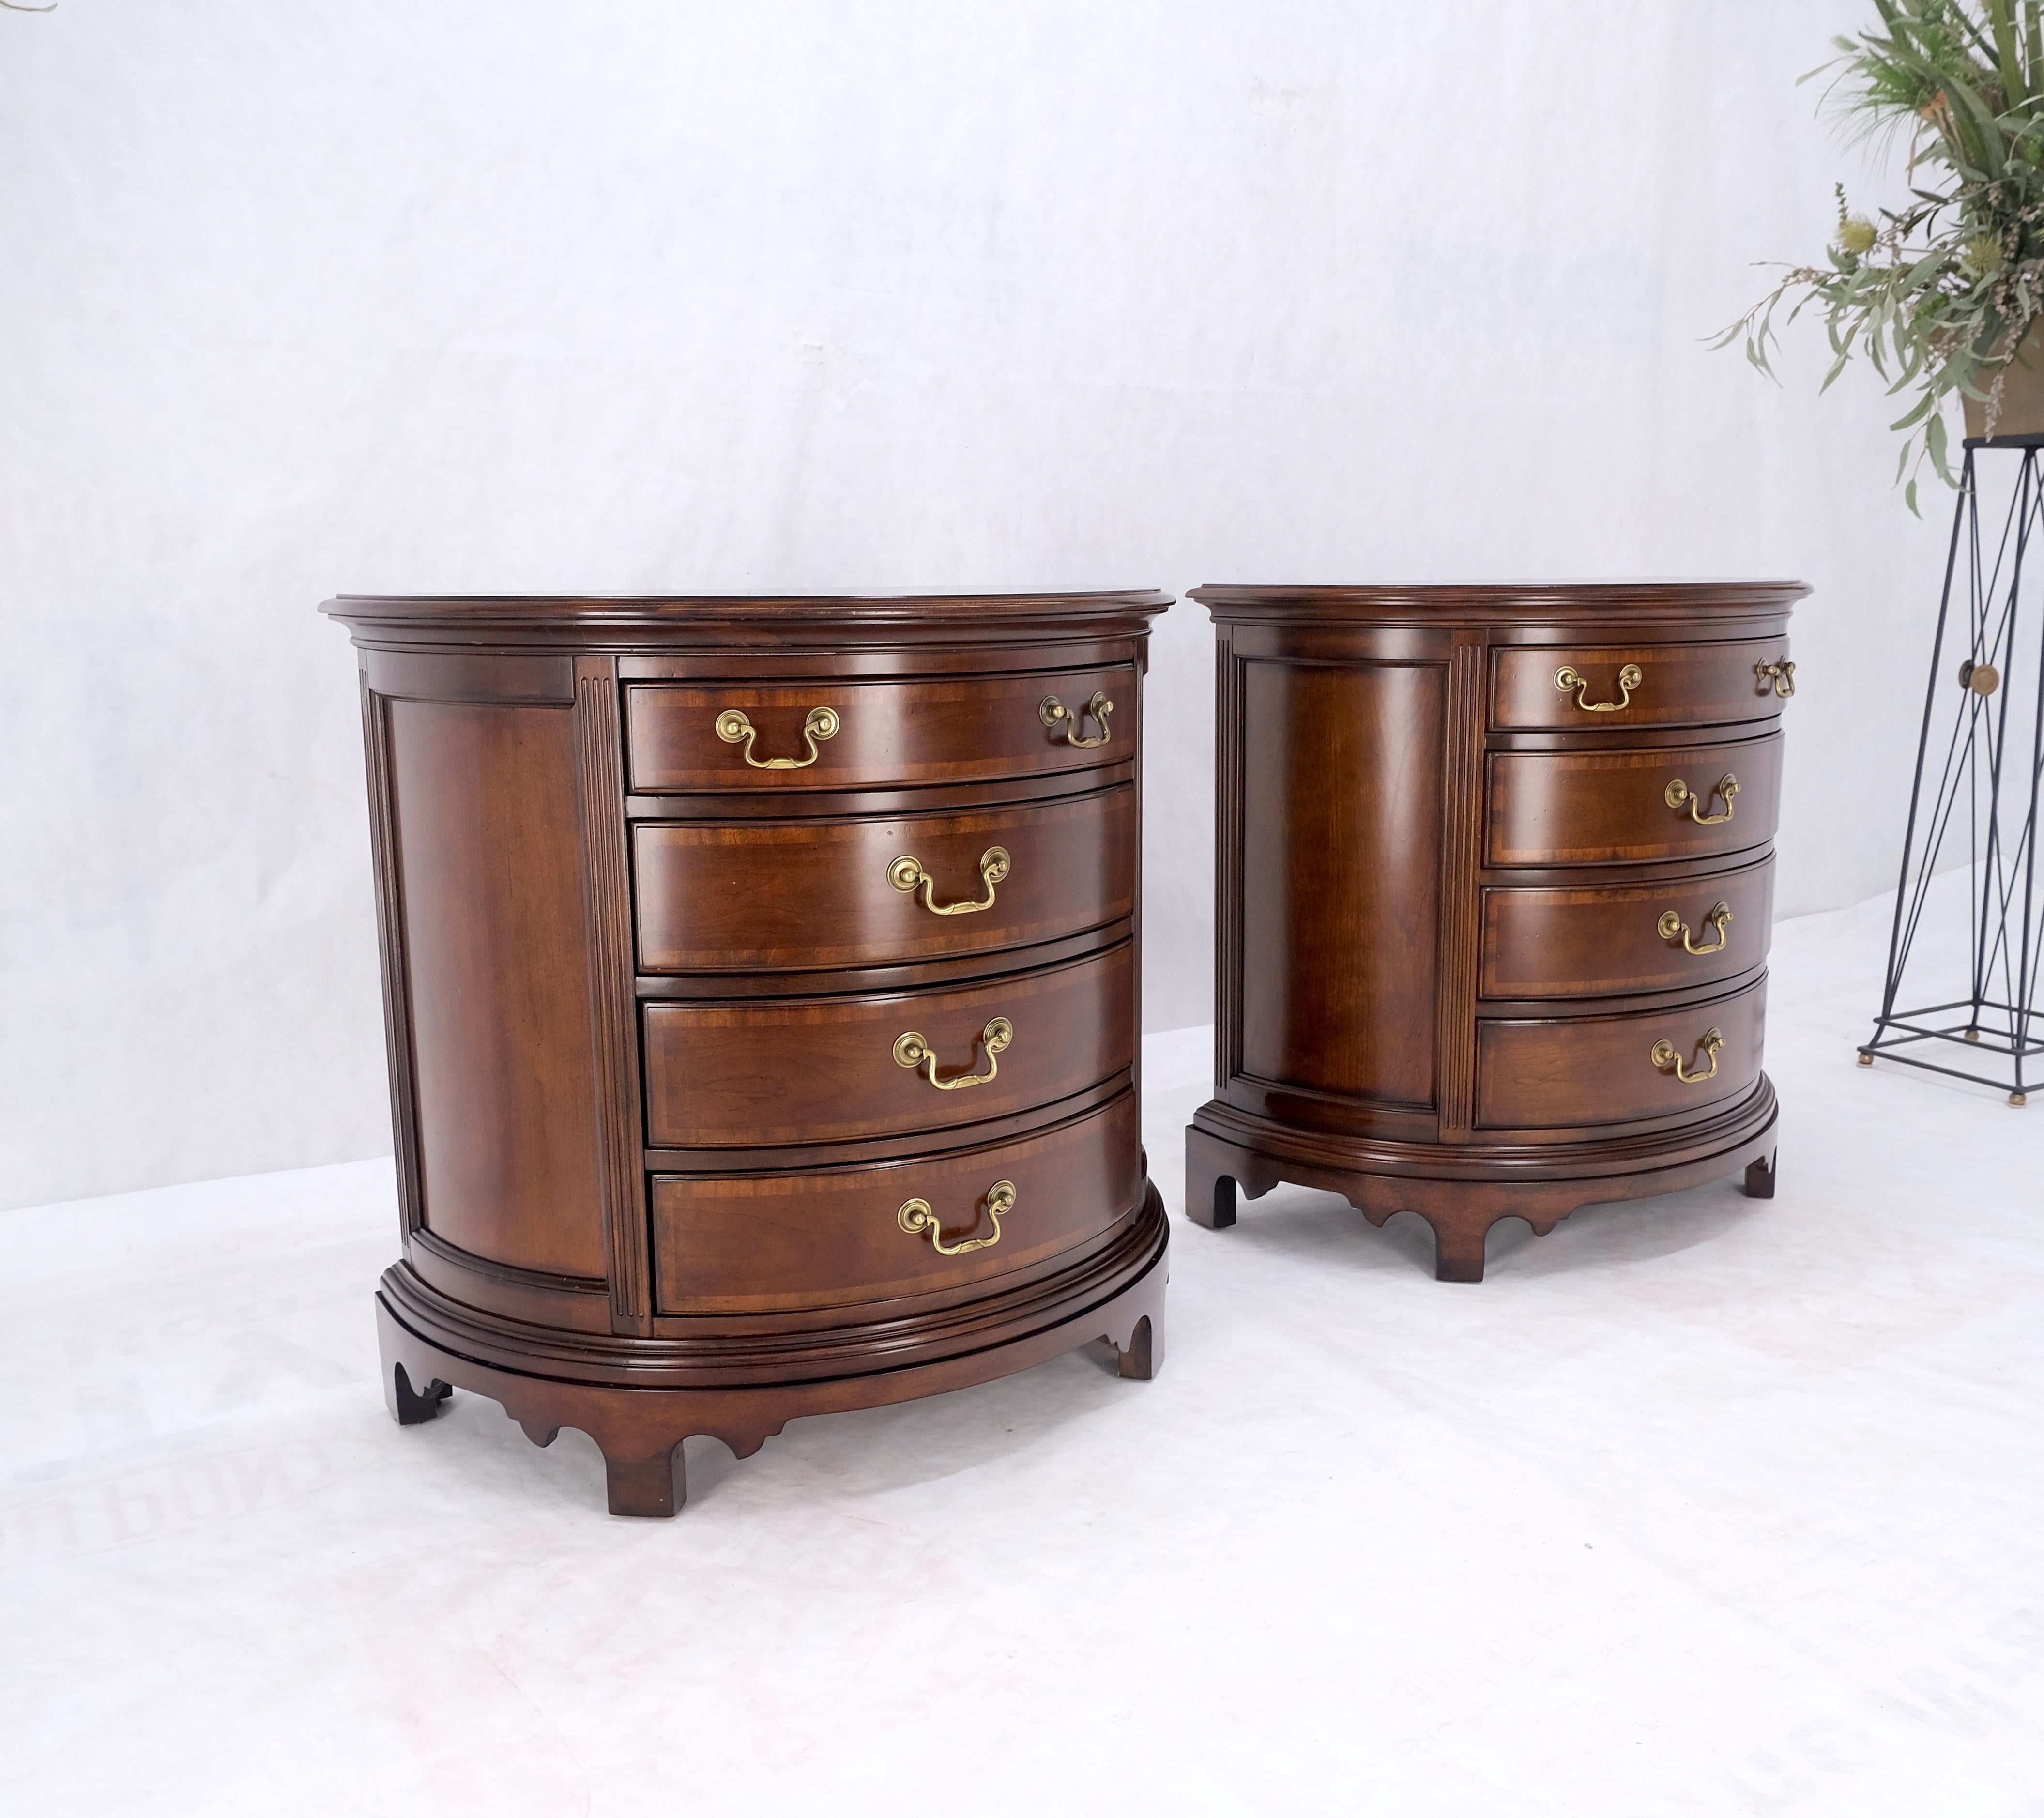 20th Century Pair of 4 Drawer Banded Top Demi Lune Consoles Dressers Brass Drop Pulls MINT! For Sale